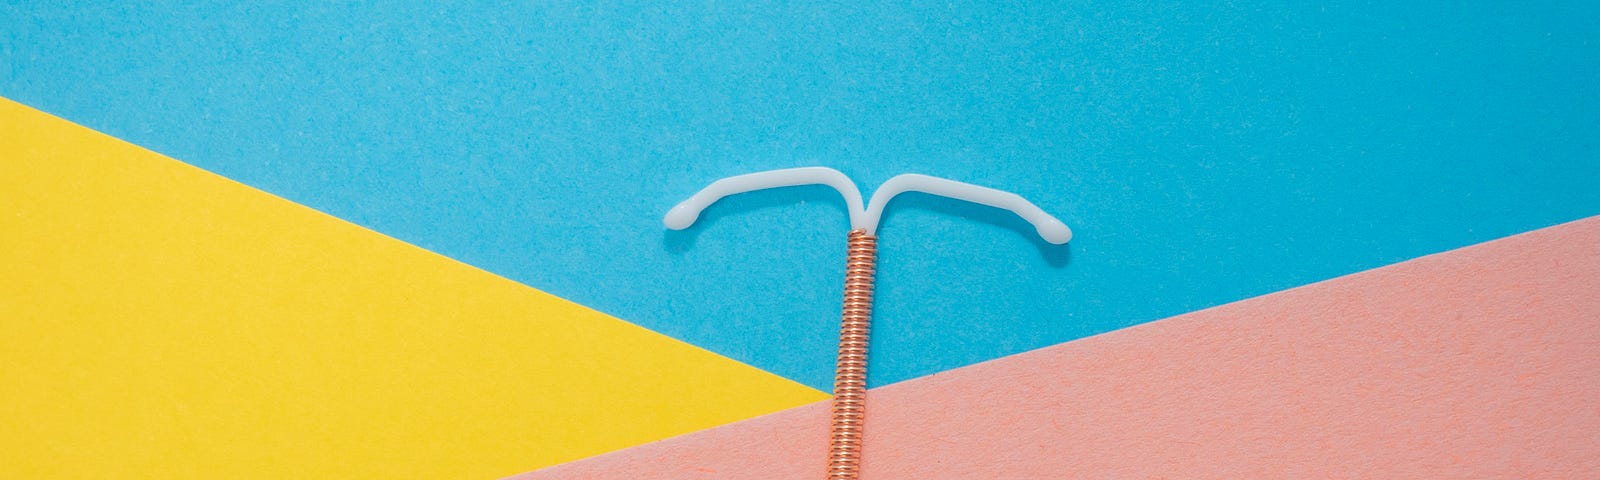 An IUD device on a colorful background